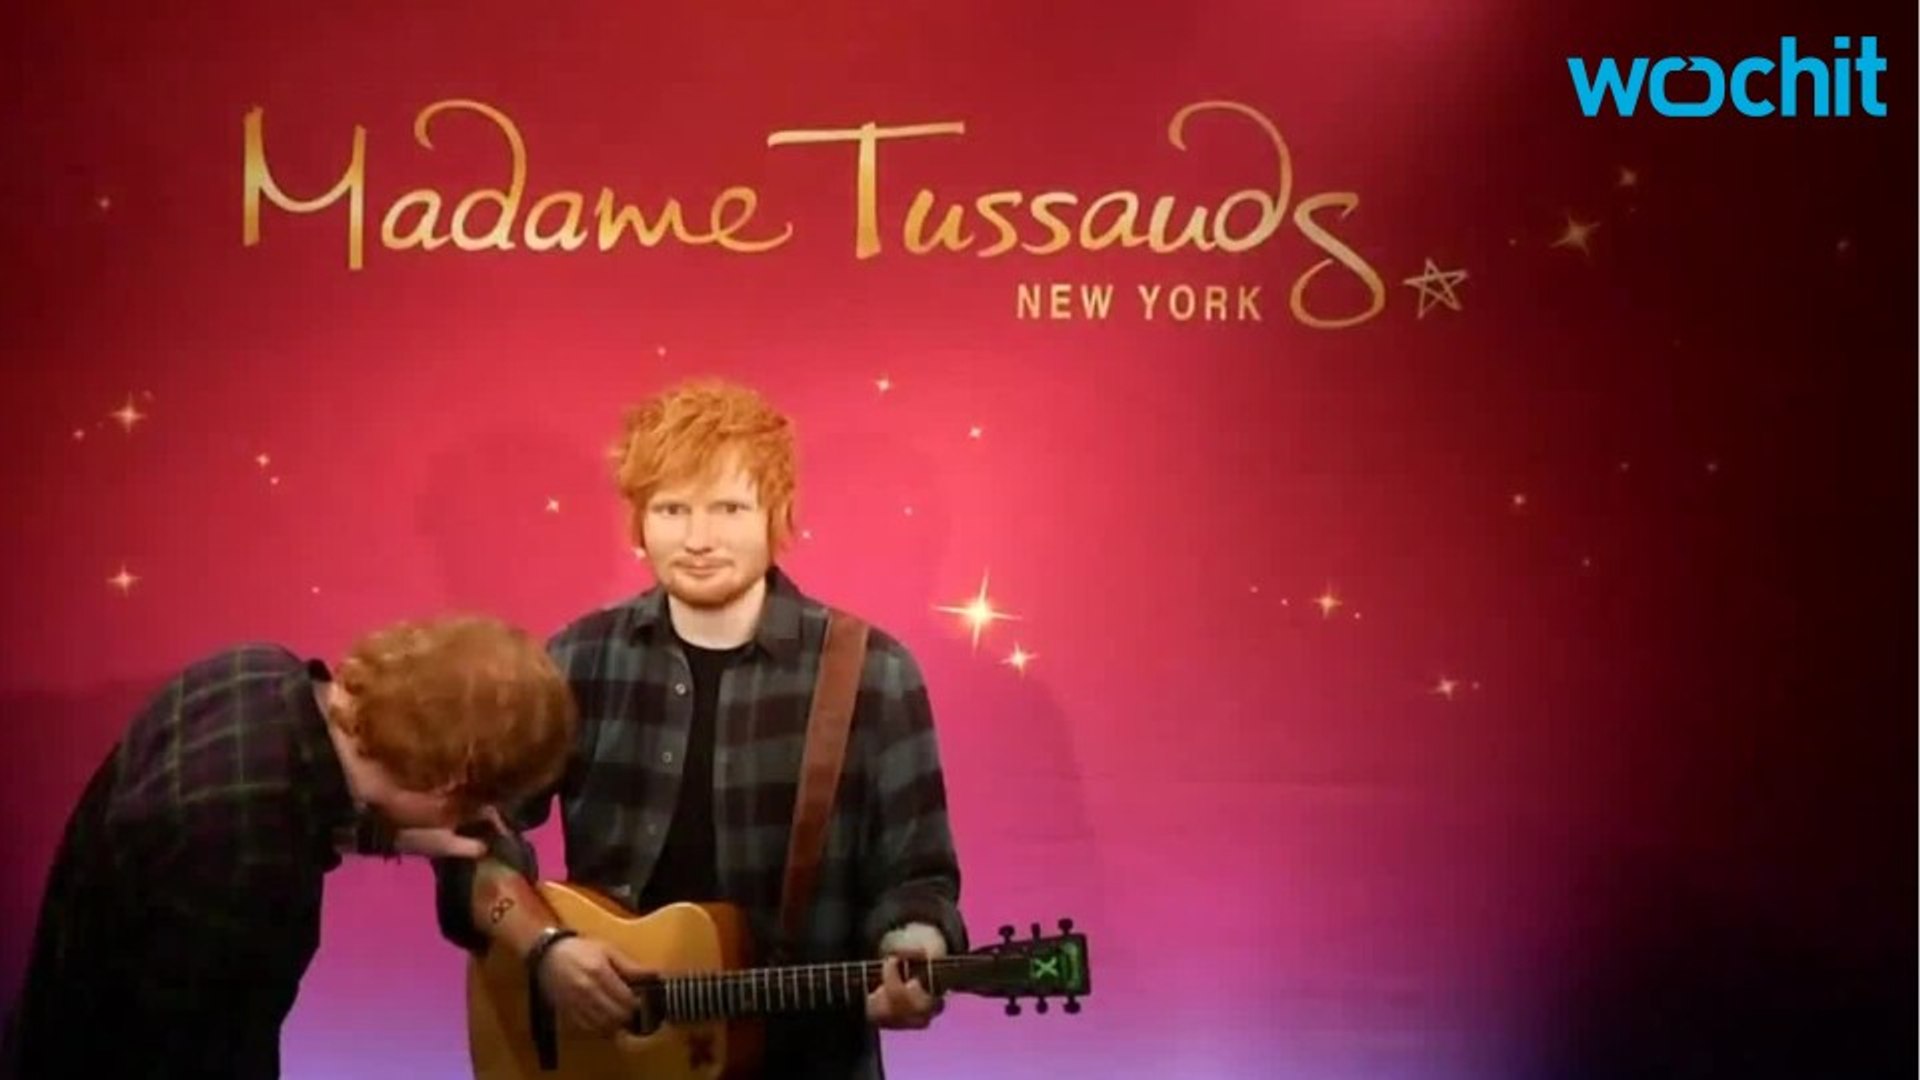 Ed Sheeran Is Being Sued For Stealing Song By X Factor Winner